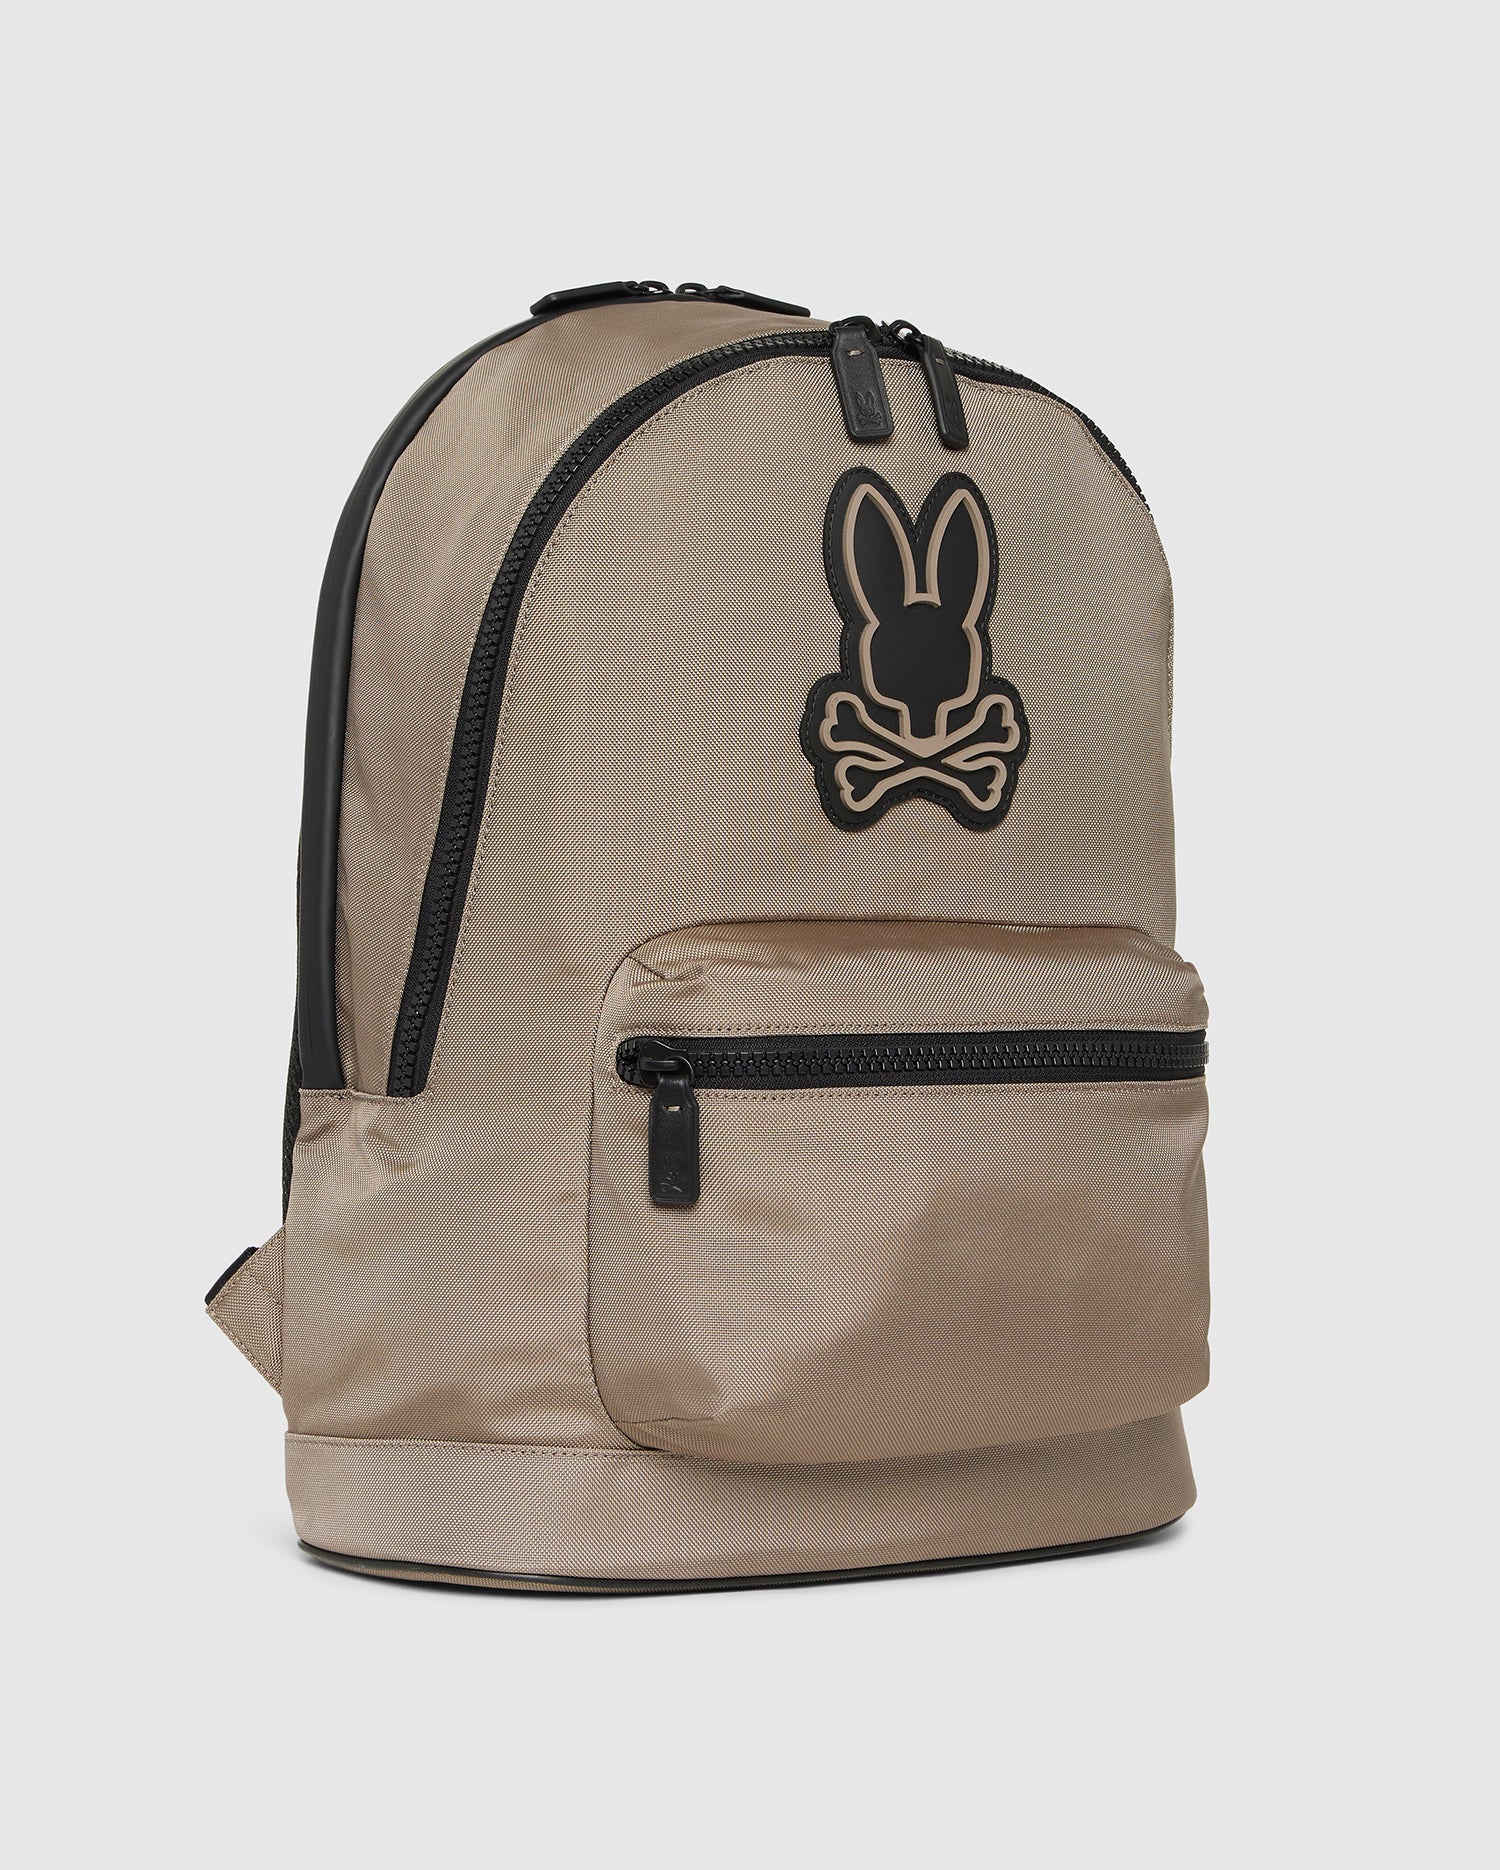 A tan MENS DOME BACKPACK - B6A628Z1BP by Psycho Bunny features a black bunny logo with crossbones on the front. It boasts a large main compartment, a padded laptop compartment, and a smaller front zippered pocket, all accented with black zippers and straps. The background is plain white.